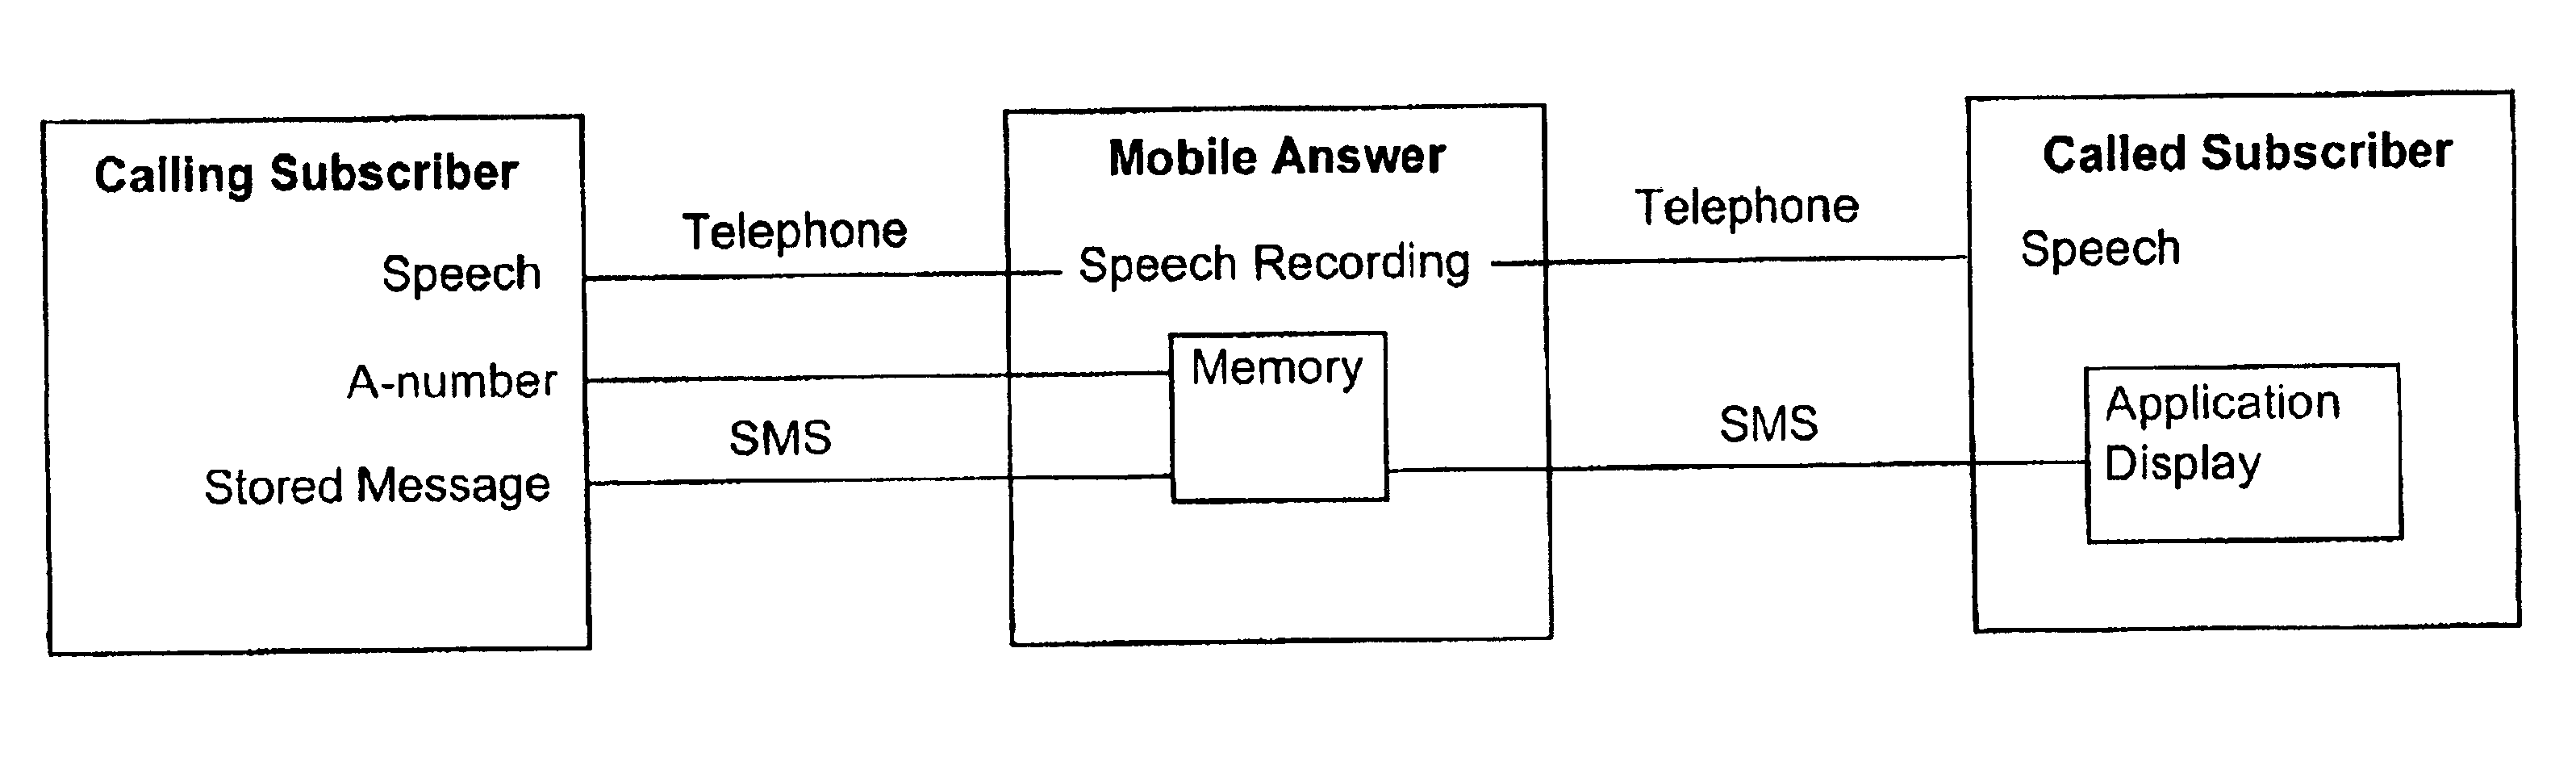 Procedure to transmit information at telephone answering service